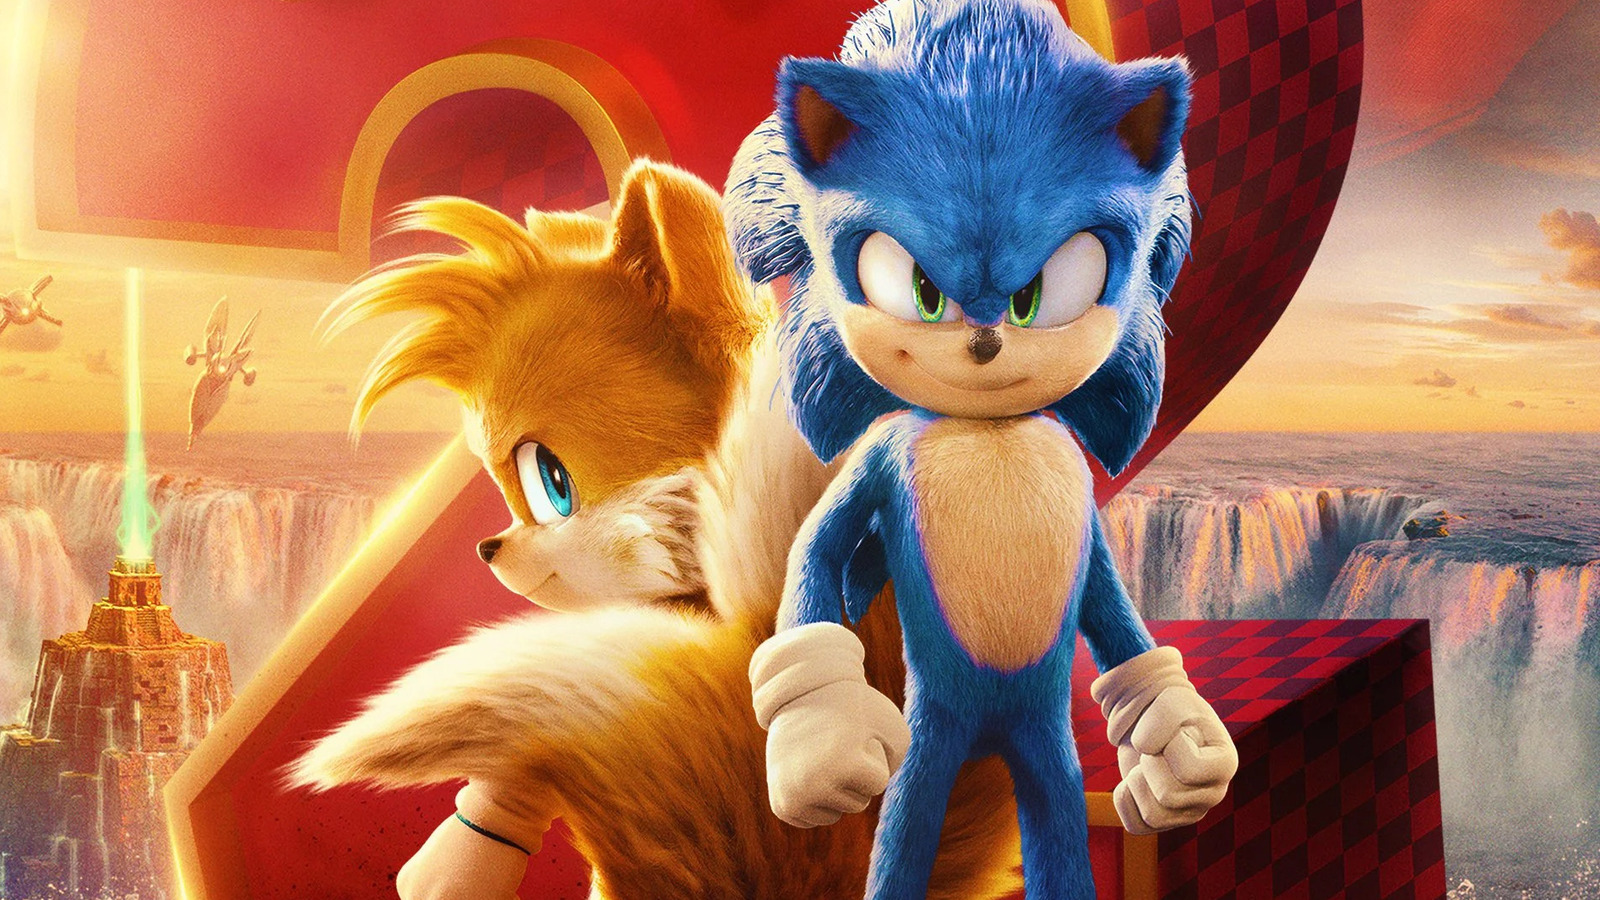 Sonic the Hedgehog Movie Universe Grows With Third Film and